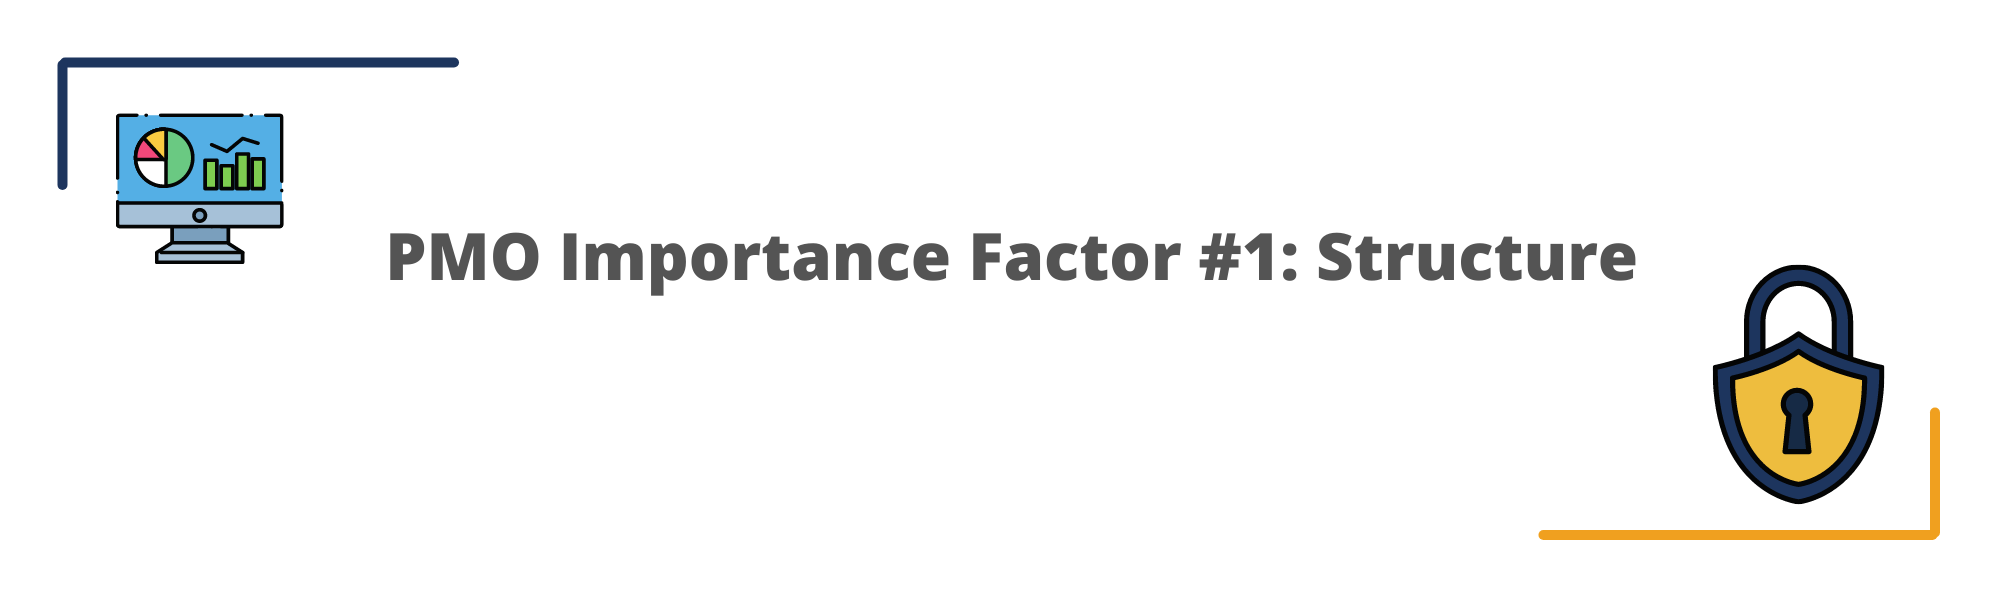 PMO Importance Factor #1: Structure